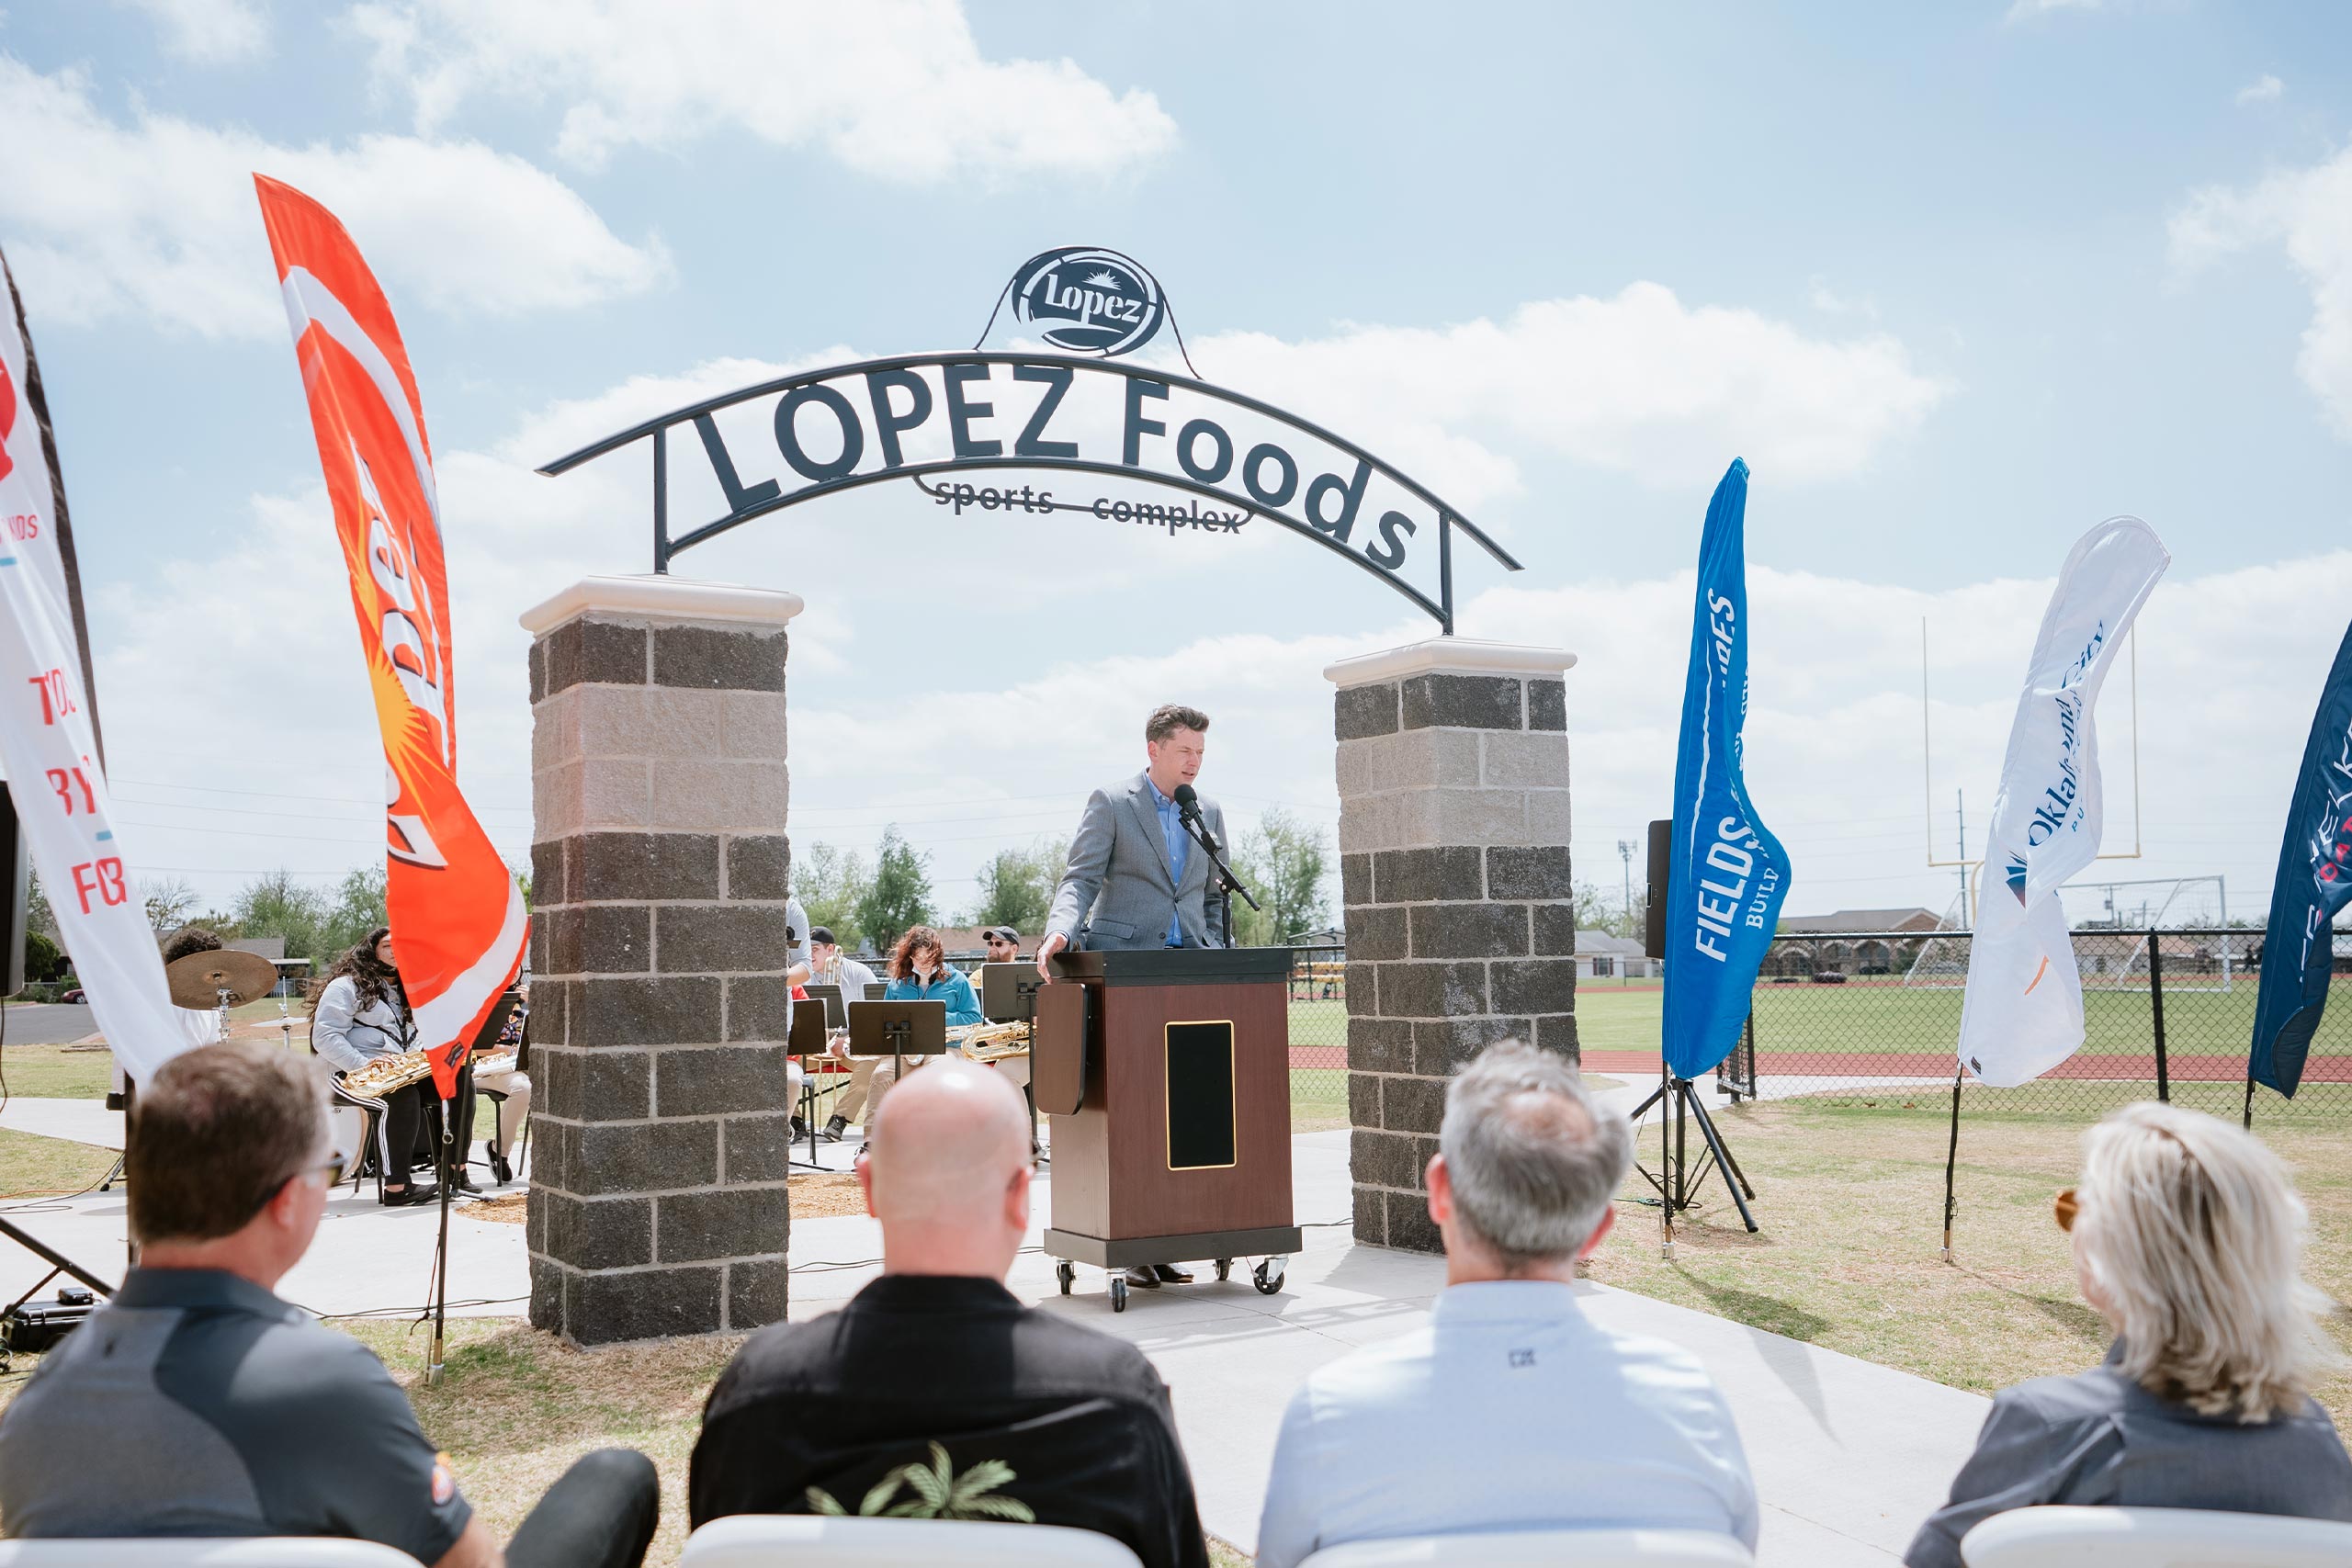 Fields & Futures Lopez Foods Sports Complex at U.S. Grant High School Community Celebration blog gallery image